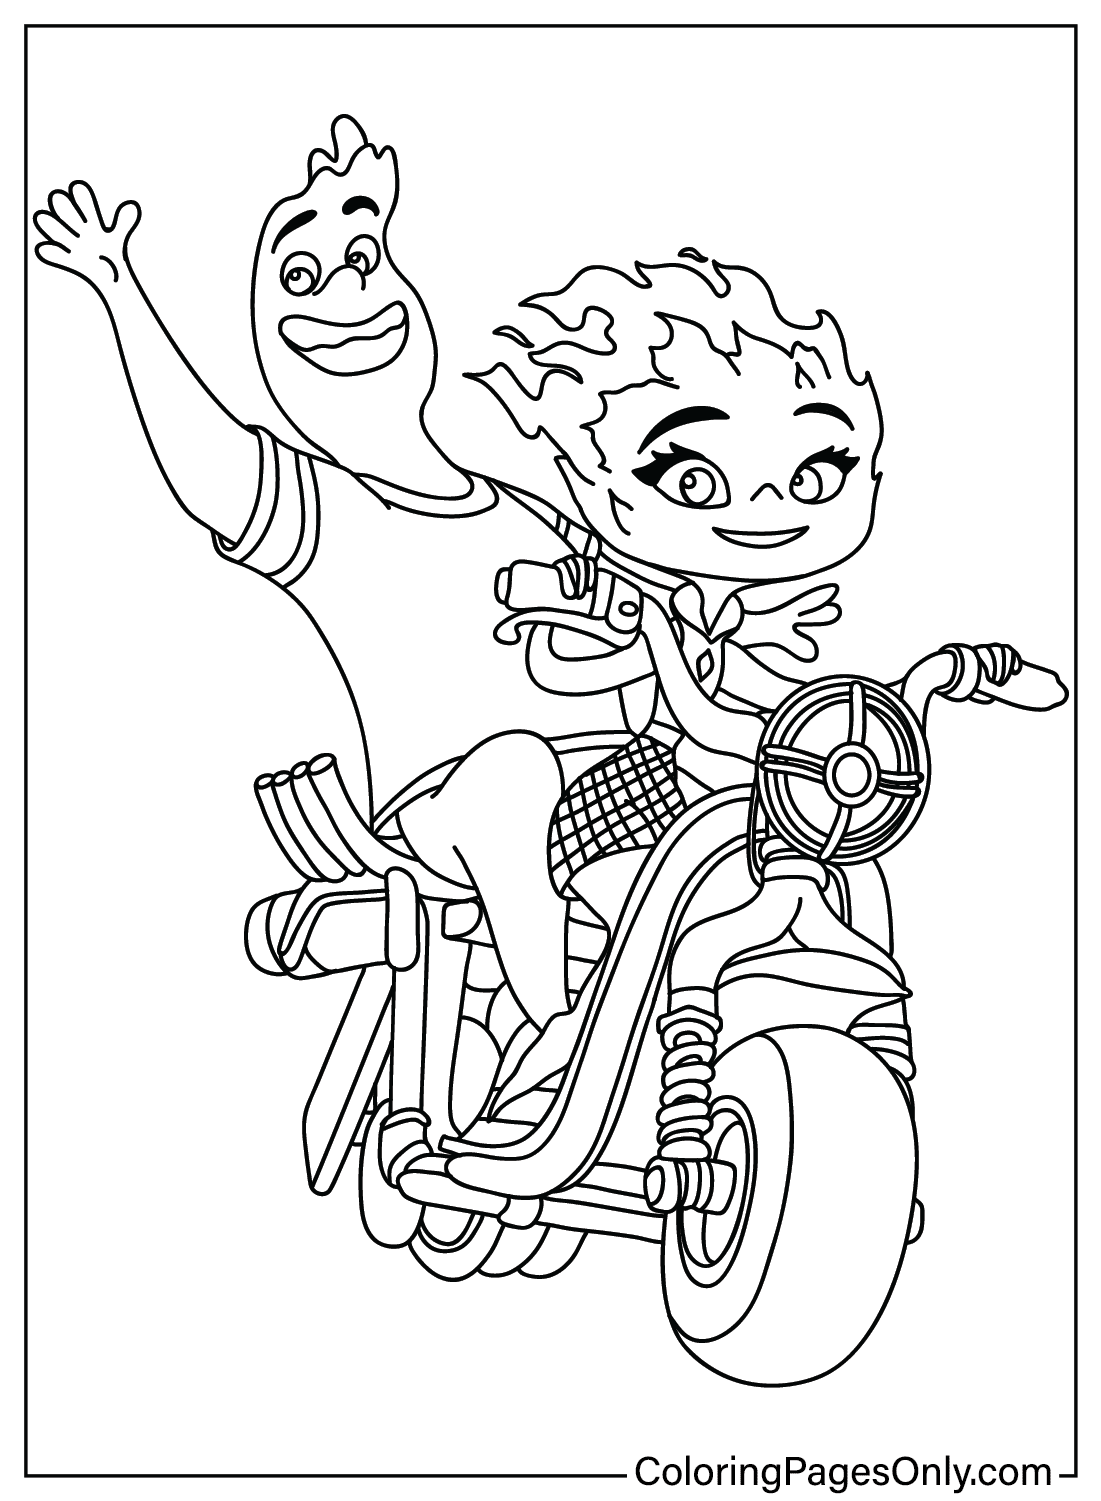 Free Elemental Coloring Page